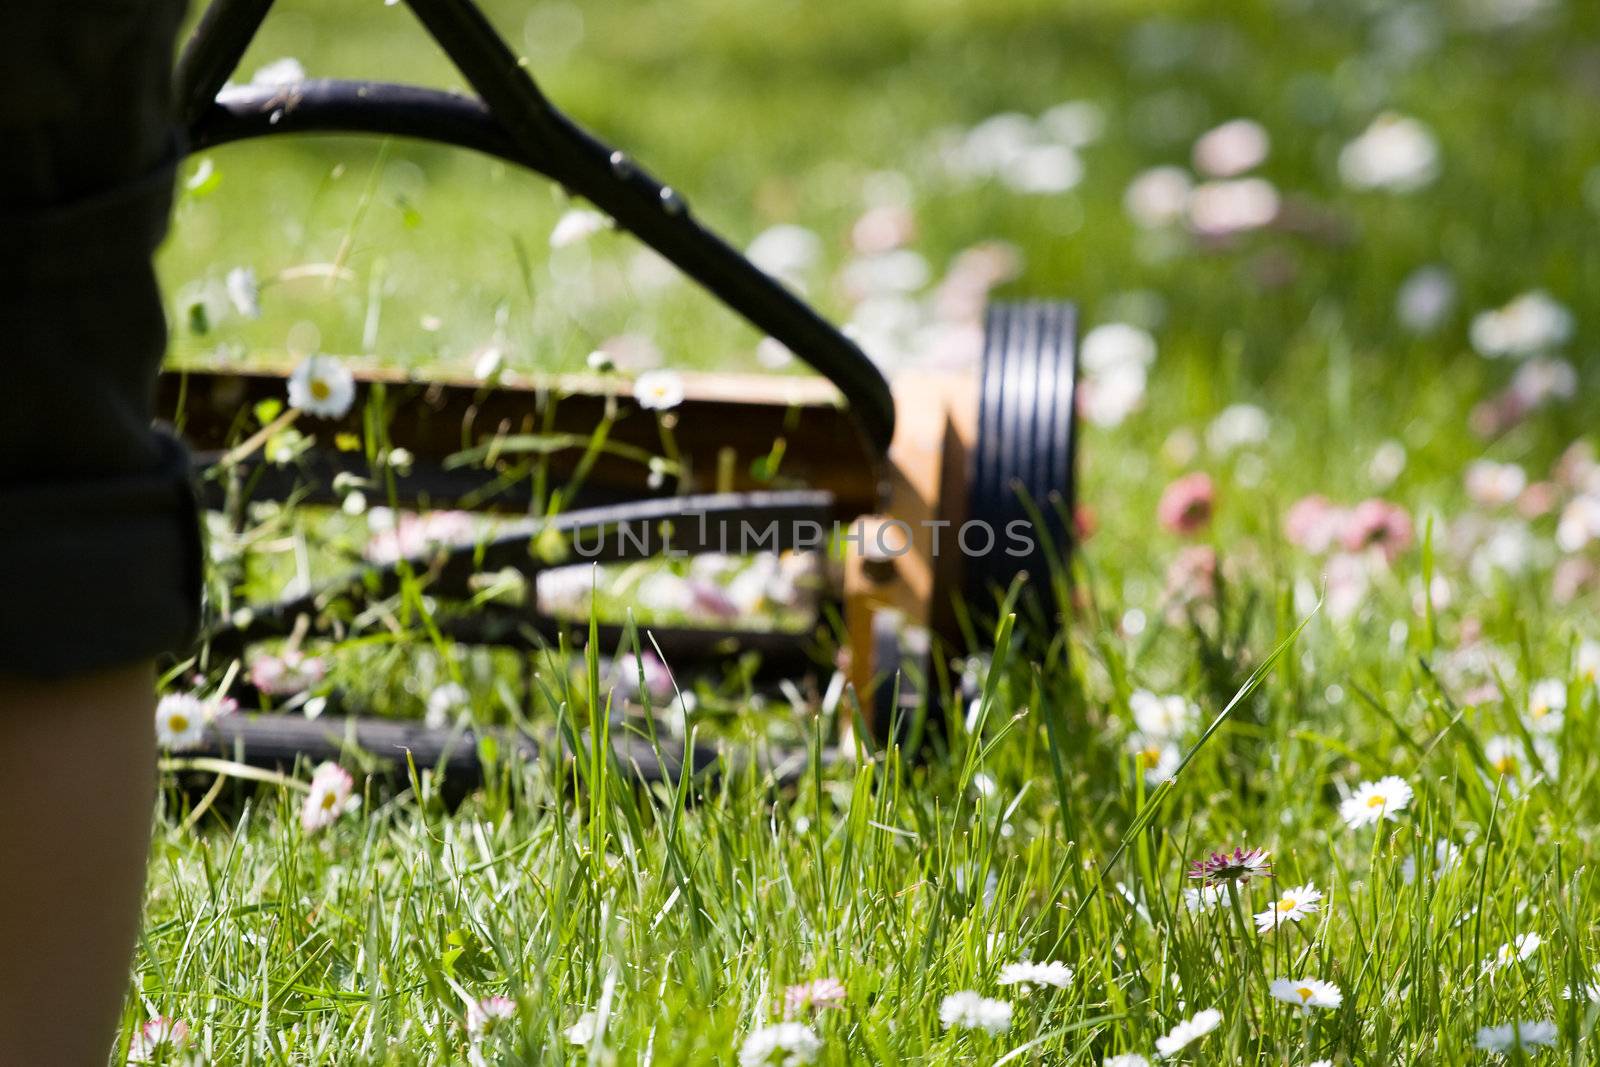 Hand lawn mower by ints